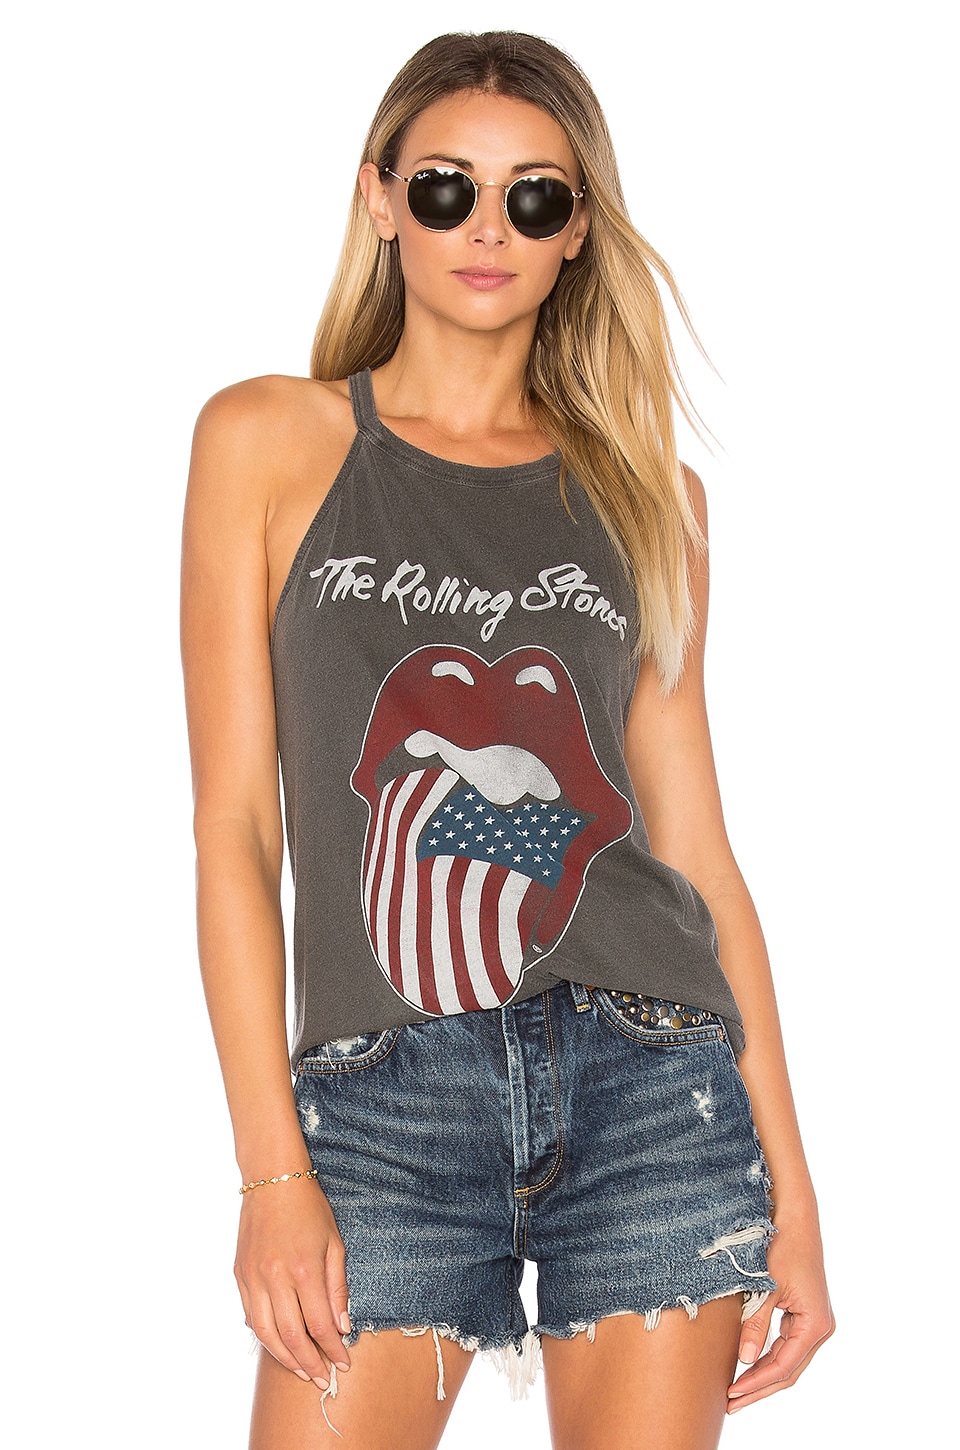 DAYDREAMER Rolling Stones Tee in Faded Black | REVOLVE